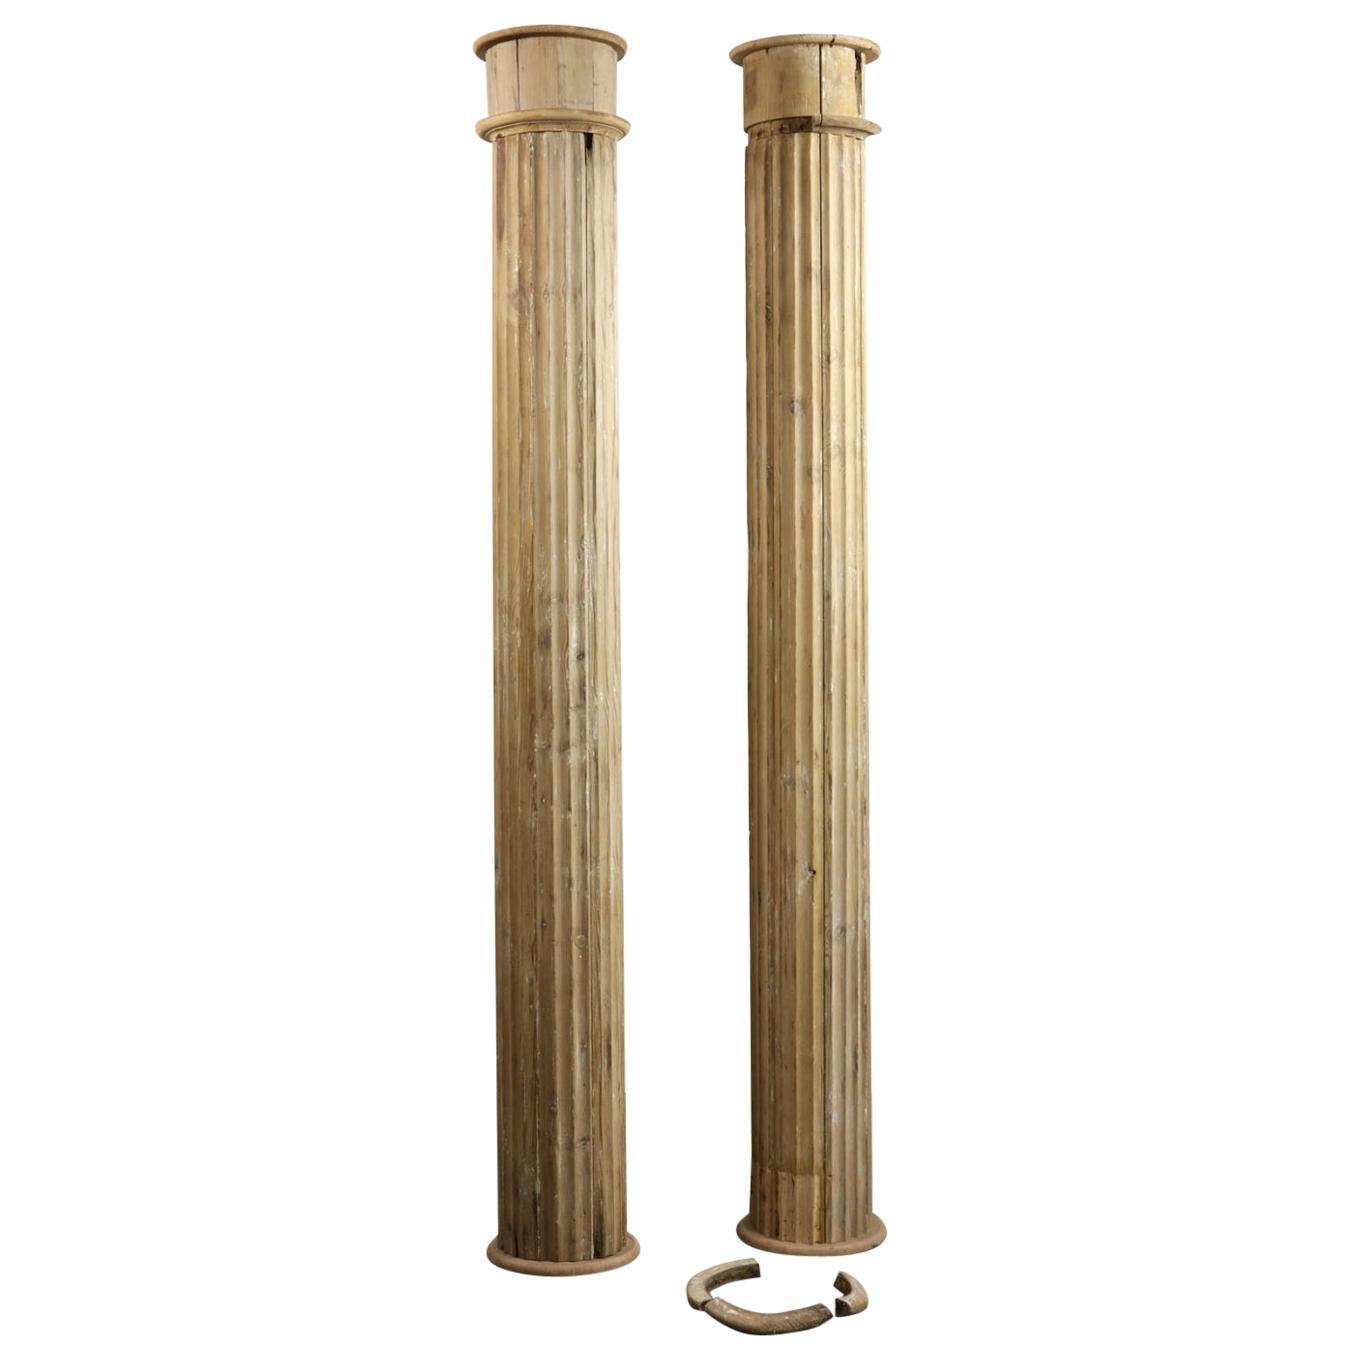 Reclaimed Fluted Pine Pillars / Columns, 20th Century For Sale